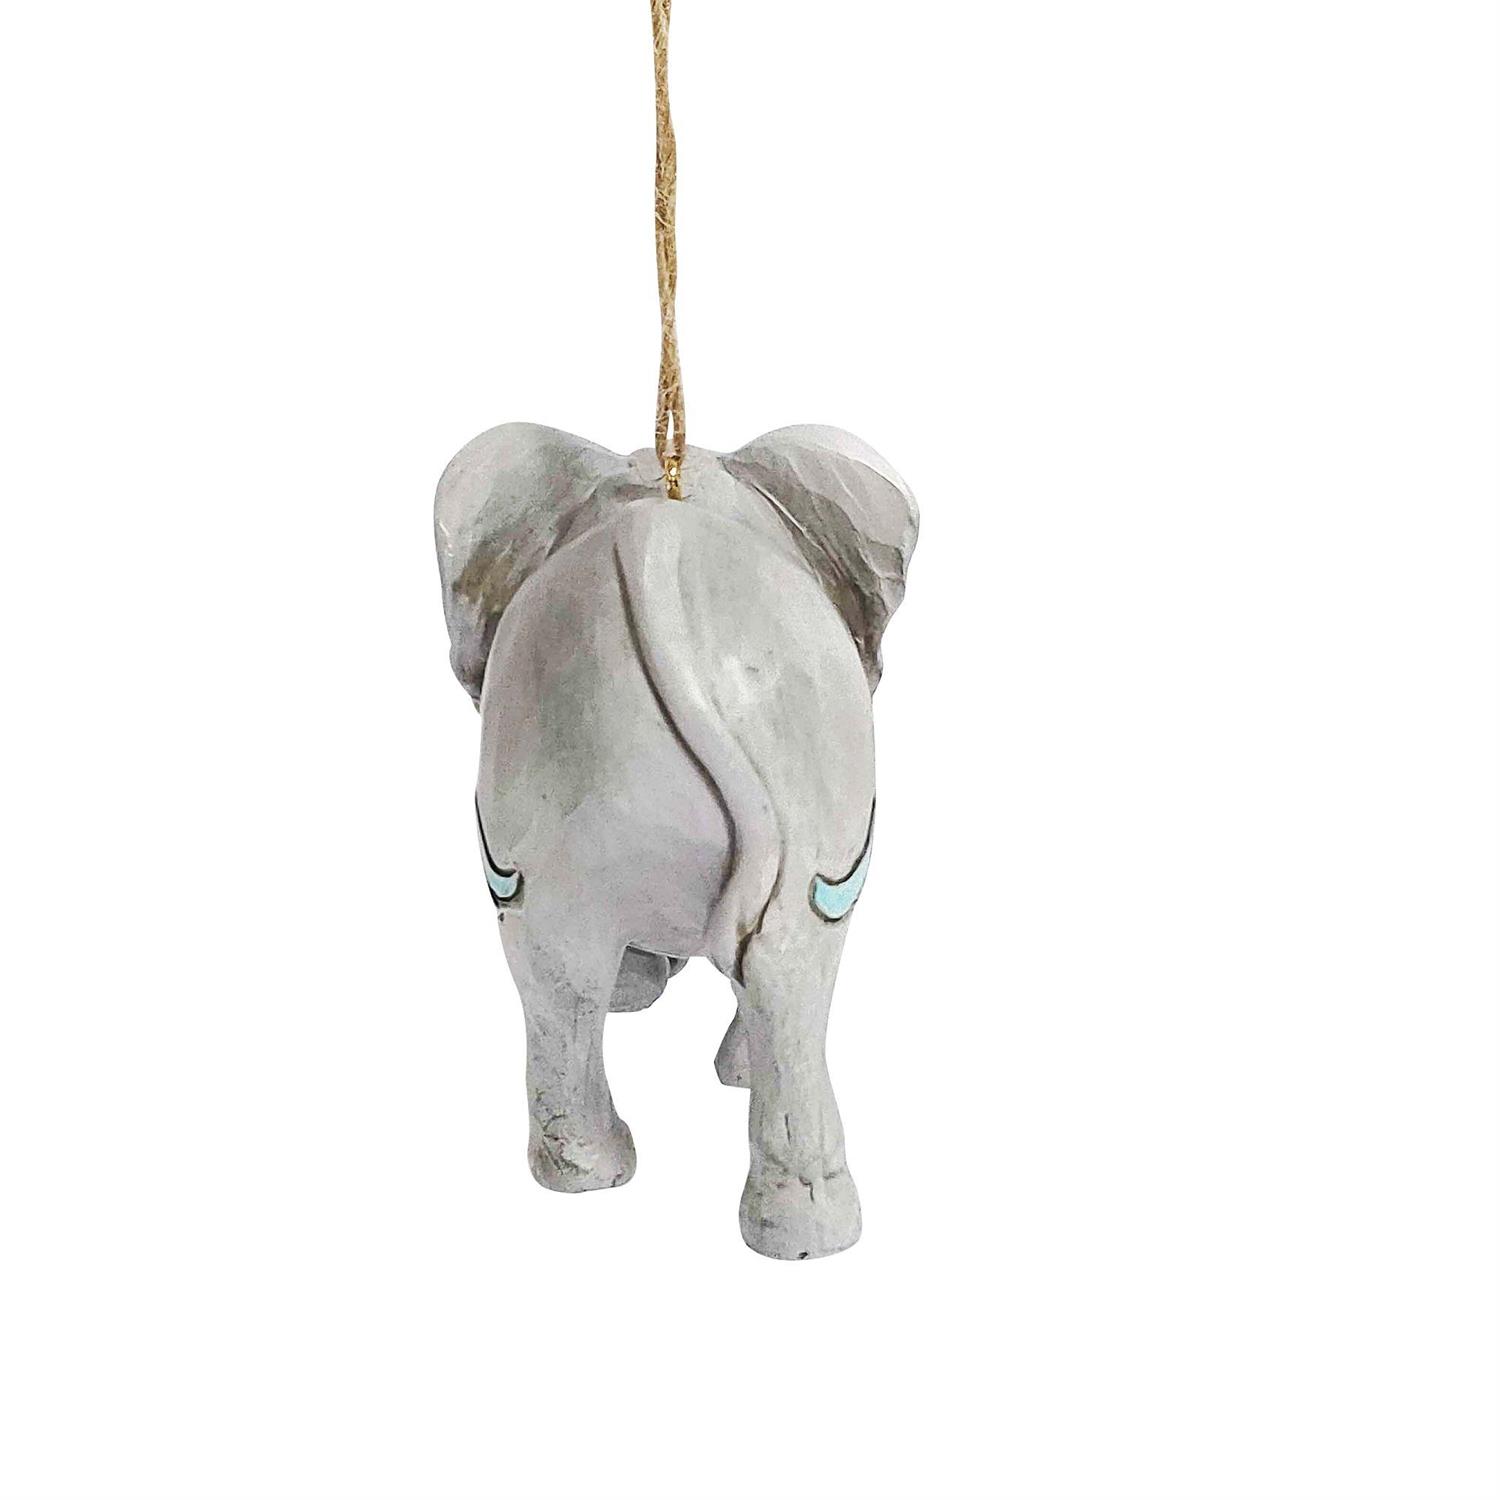 Enesco Gifts Jim Shore Animal Planet African Elephant Ornament Free Shipping Iveys Gifts And Decor